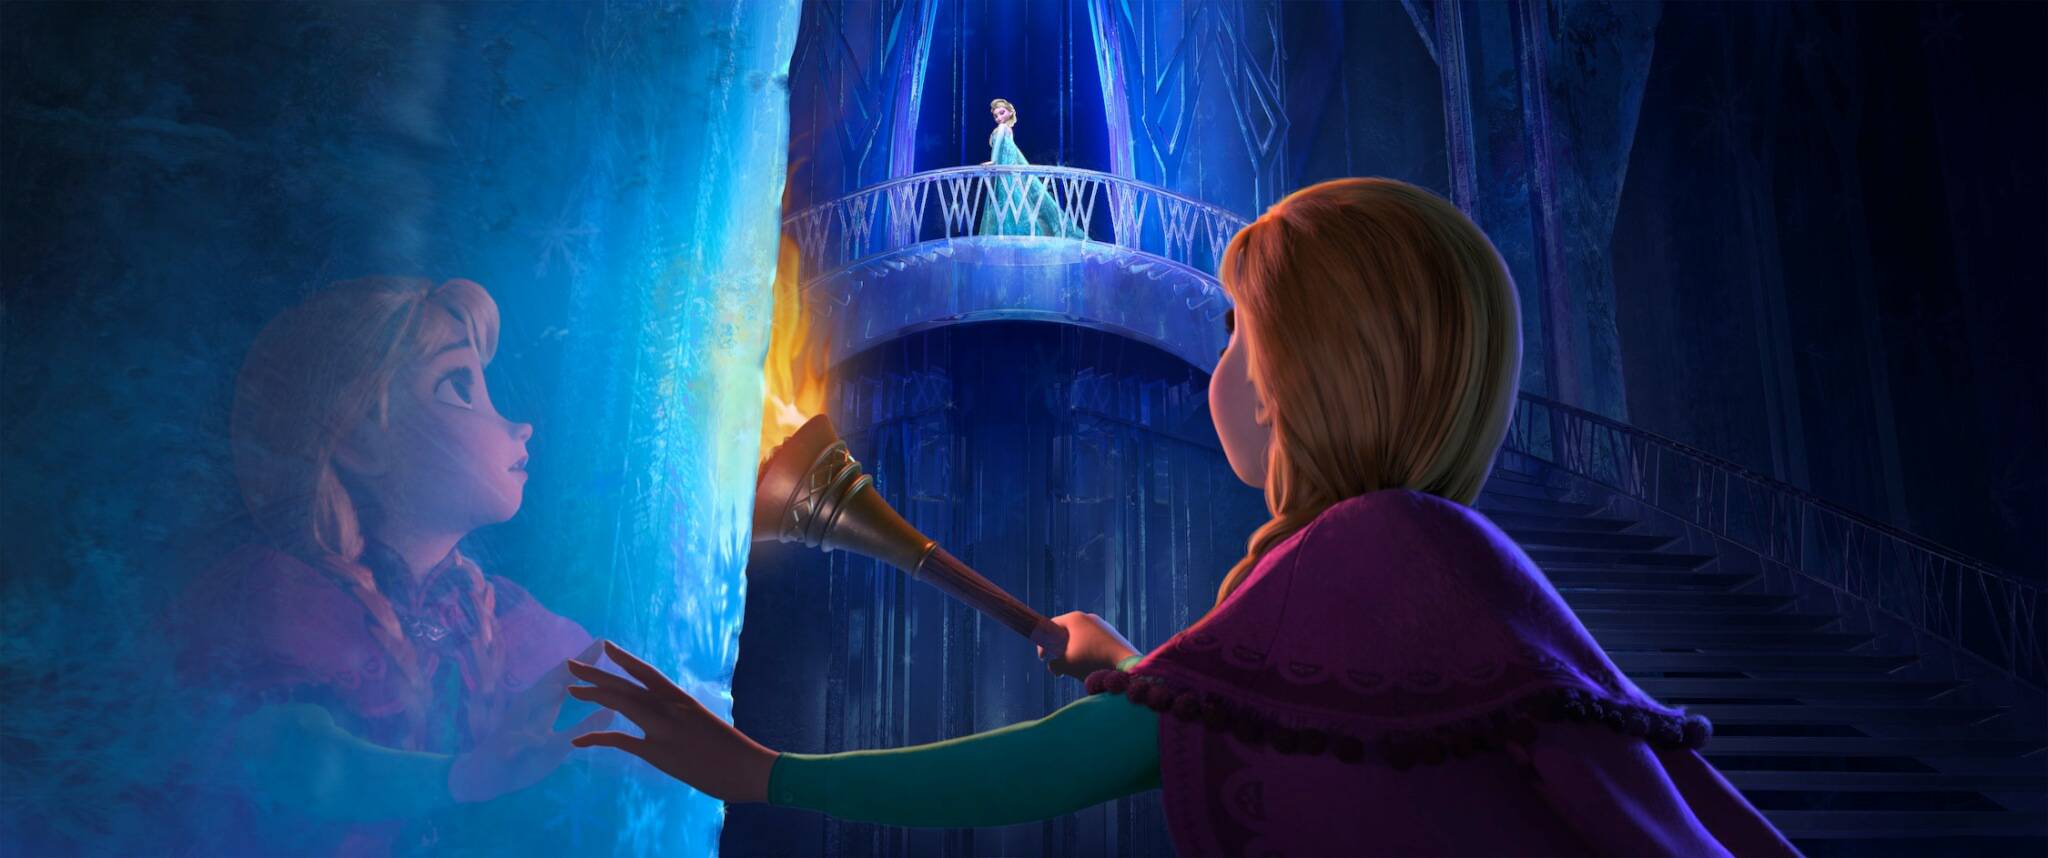 ELSA and ANNA. ©2013 Disney. All Rights Reserved.